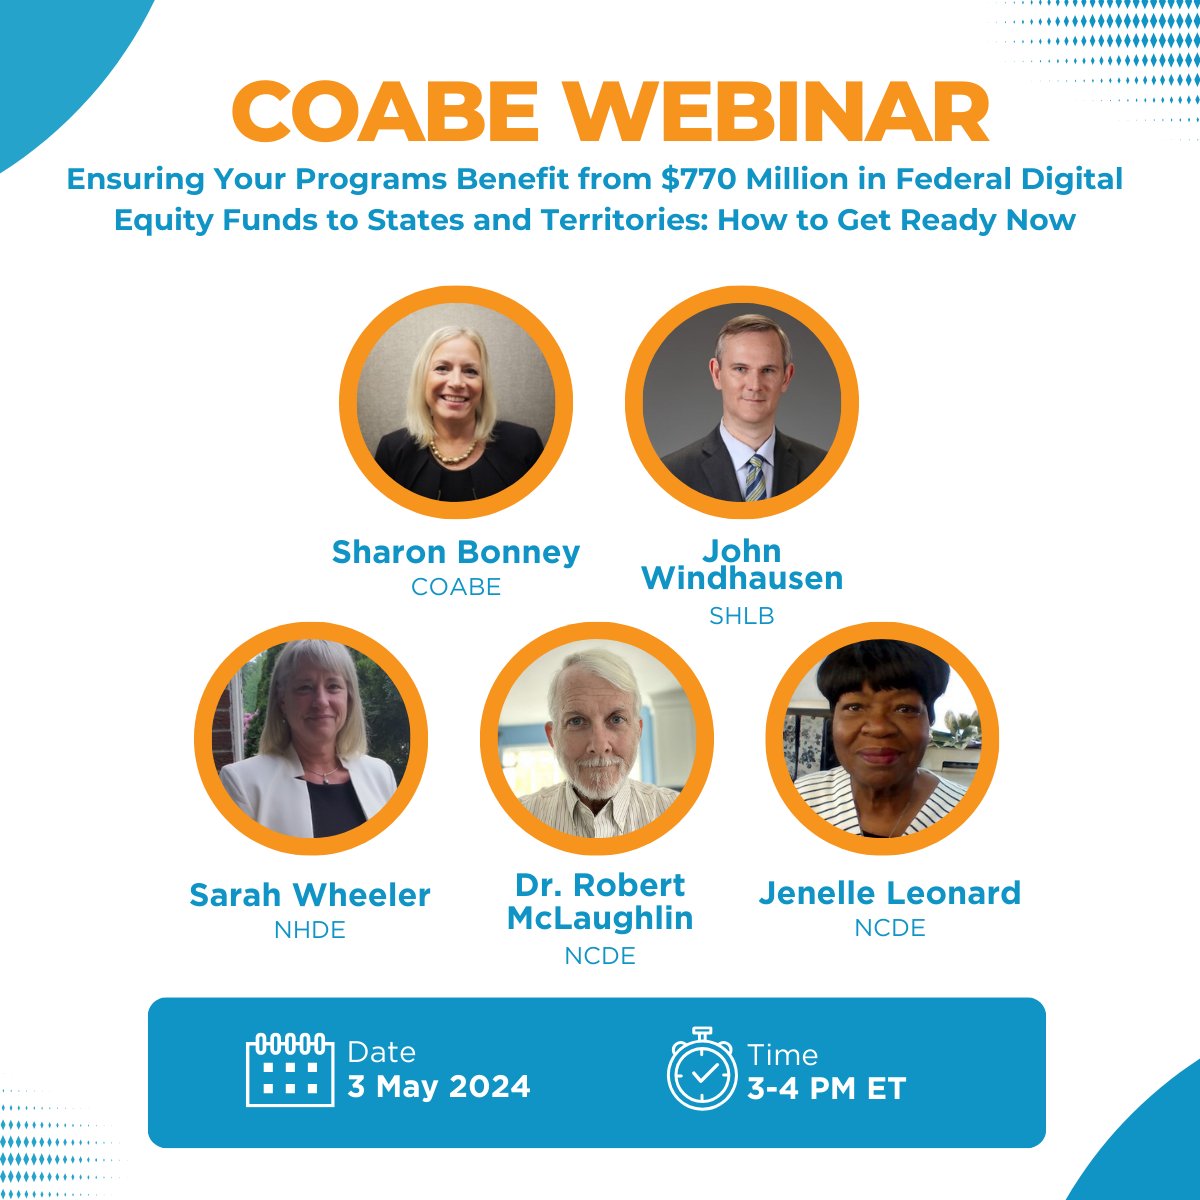 Join SHLB's Executive Director, John Windhausen, at the @COABEHQ webinar to learn how to access $770M in federal #DigitalEquity funds. 🗓️ Date & Time: May 3, 2024 | 03:00 PM ET 💻 Register here: coabe.org/upcoming-webin…